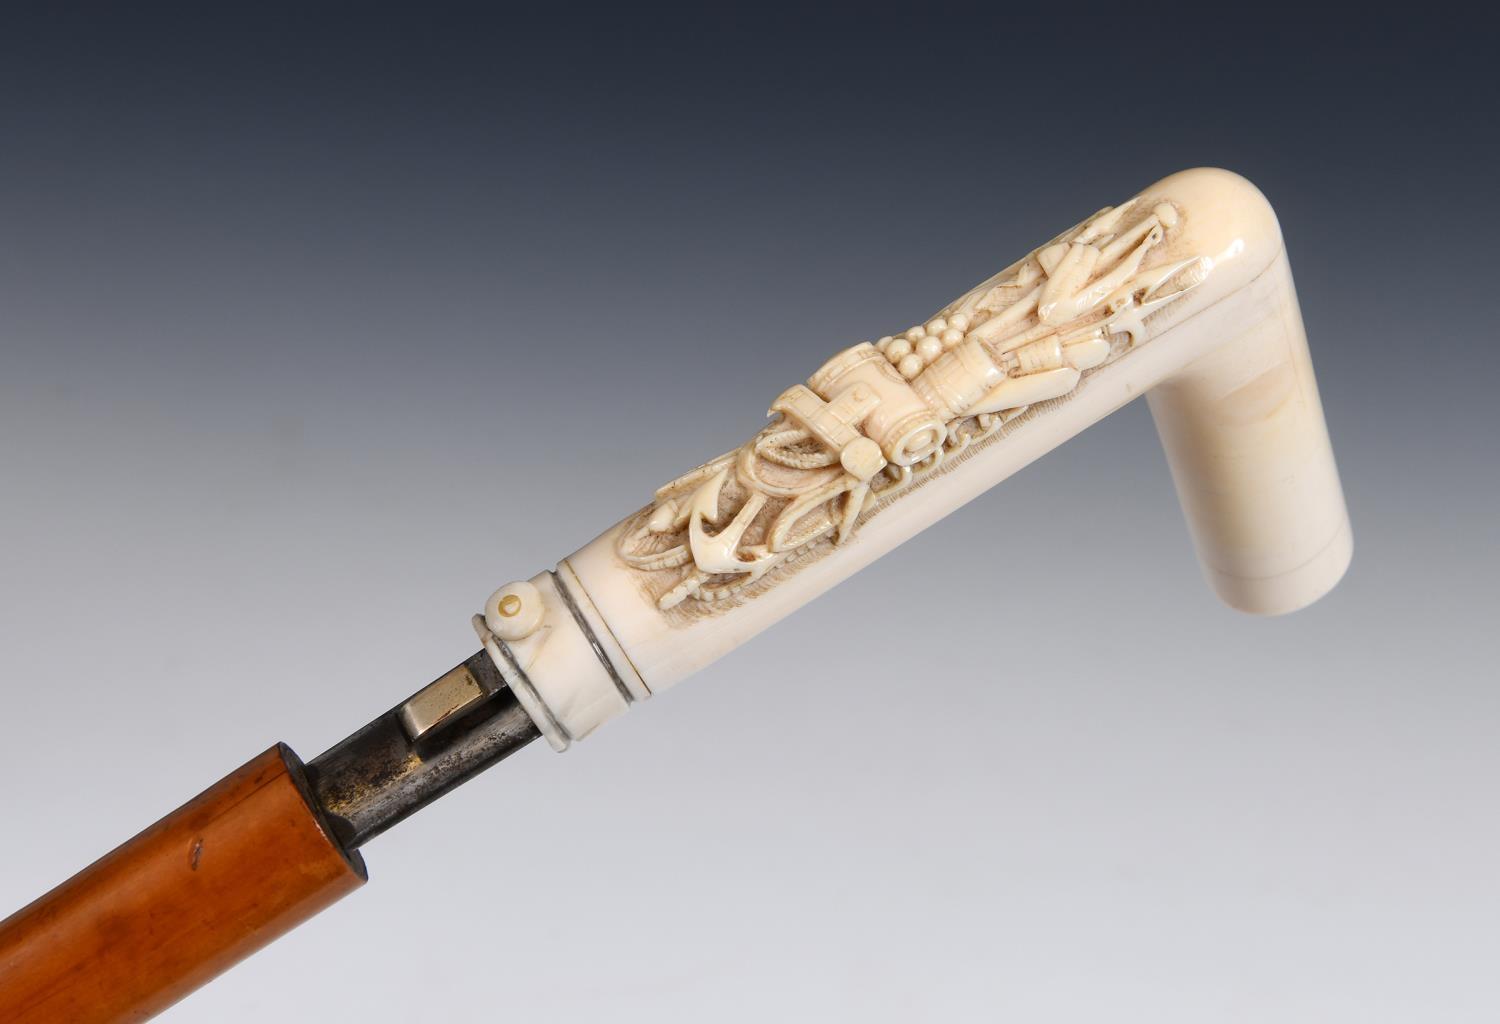 A 19th century sword stick, with an ivory handle carved with a maritime theme, possibly